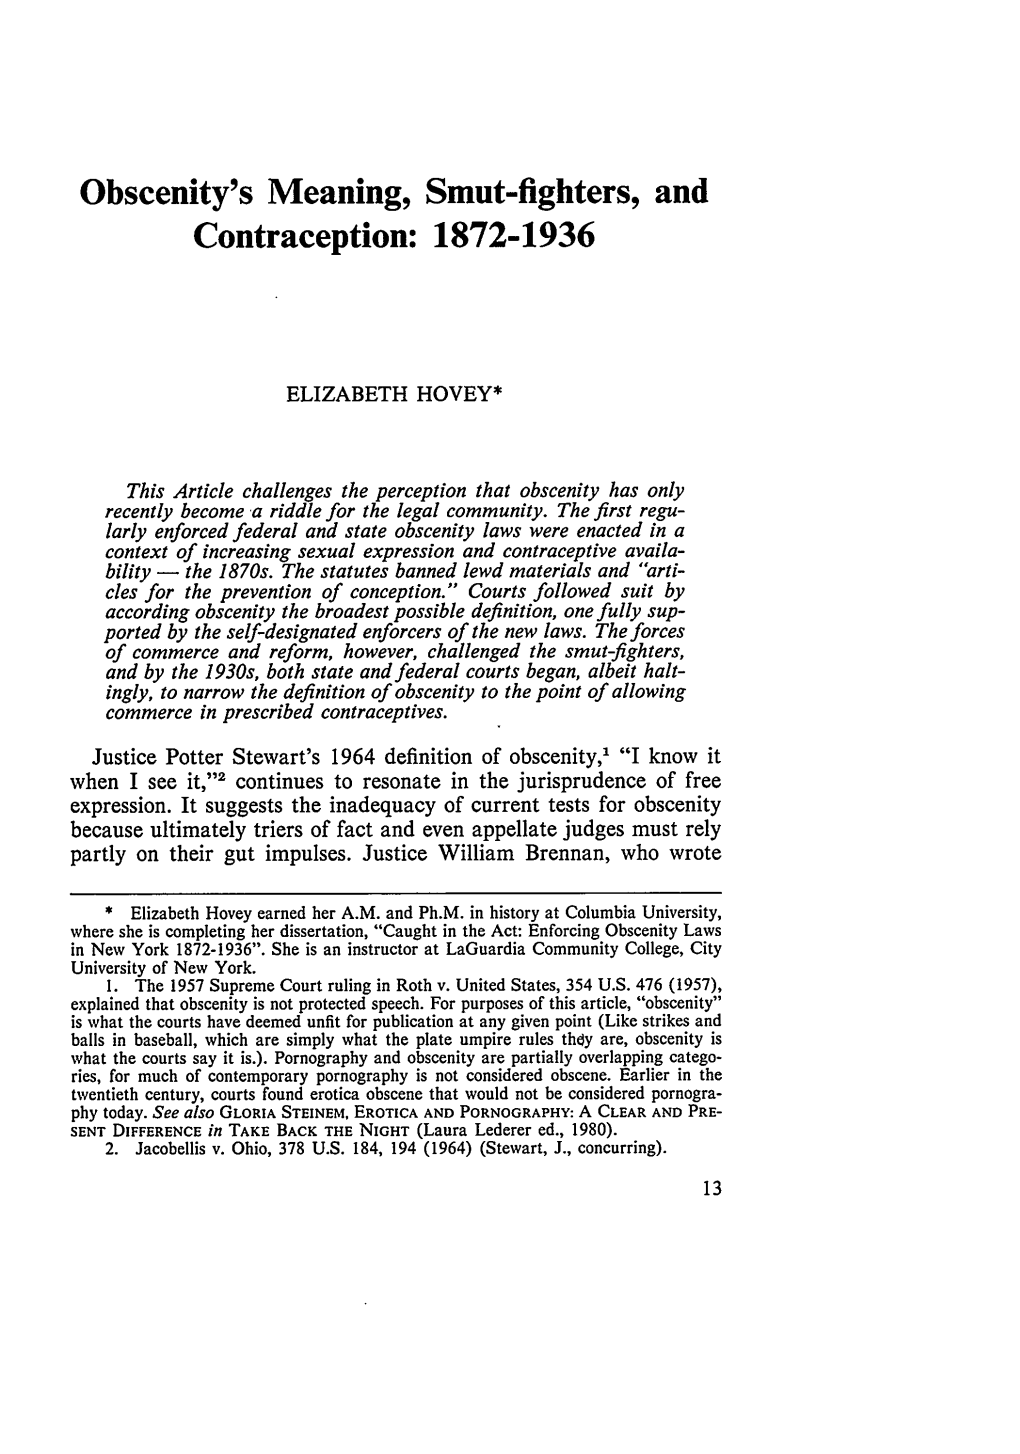 Obscenity's Meaning Smut-Fighters and Contraception: 1872-1936